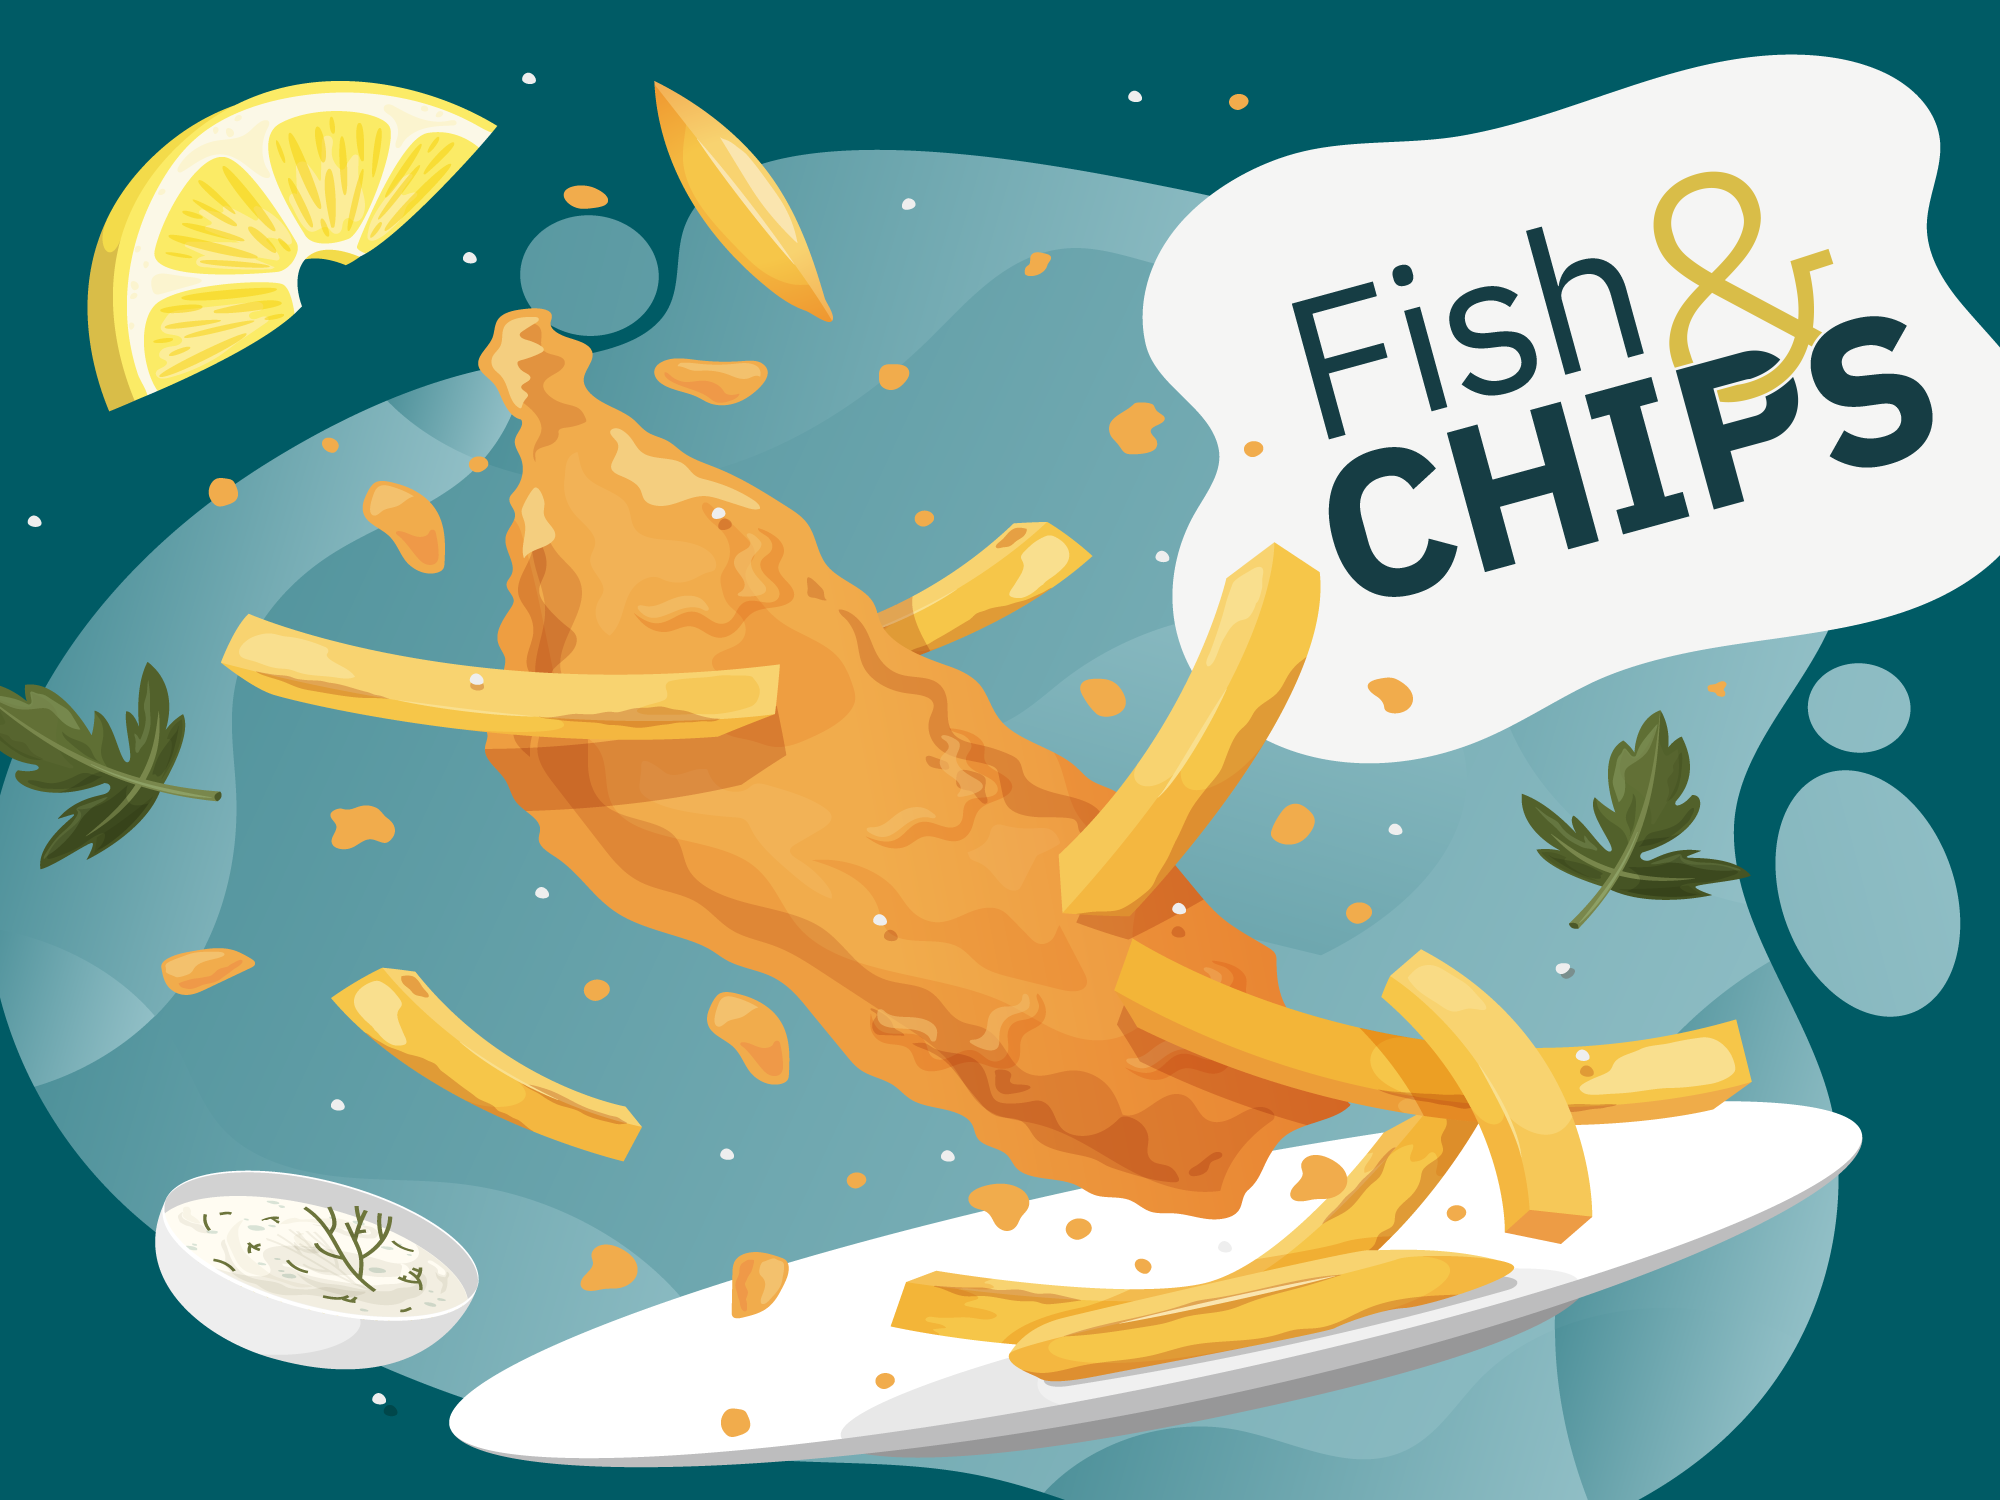 Fish and Chips webinar featured image